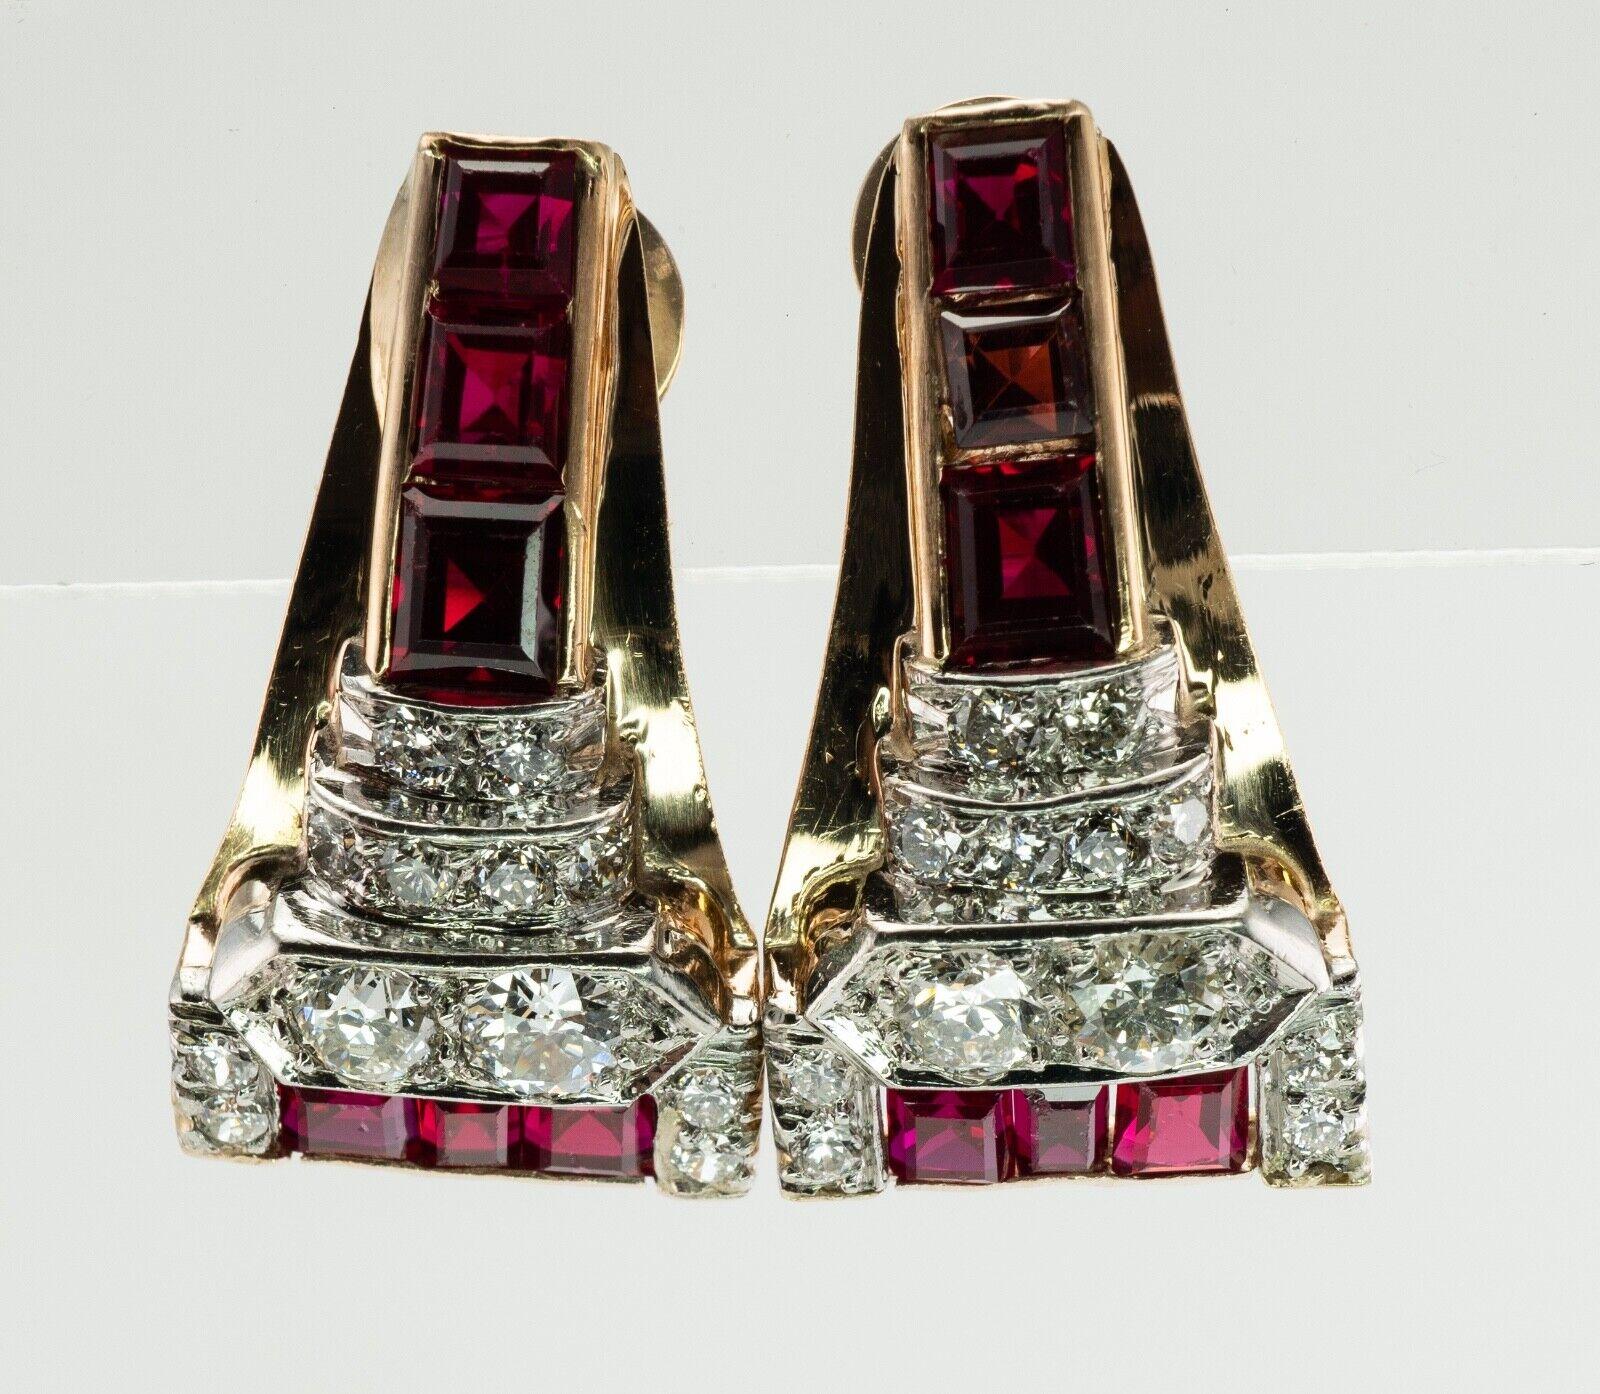 Ruby Diamonds Earrings 14K Gold Retro Vintage

These earrings are crafted in solid 14K Yellow gold.
Each earring is set with 12 diamonds.
Two bigger old cut diamonds (high culets) are .15 carat each.
Ten more round brilliant cut diamonds total .22